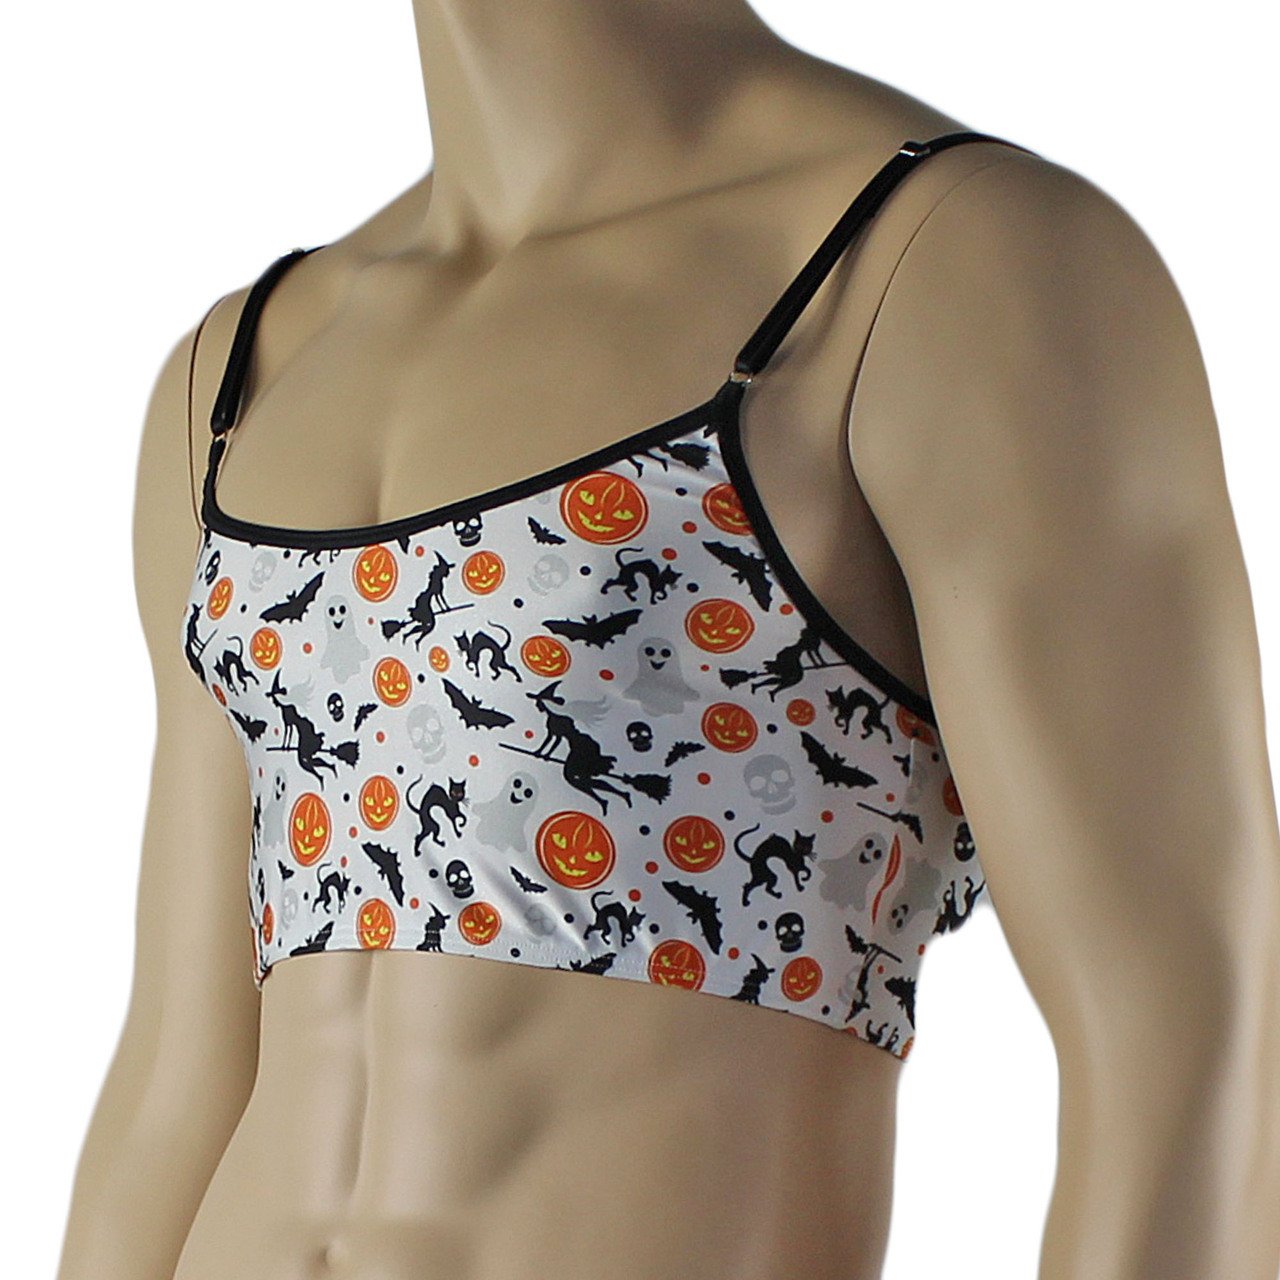 Mens Halloween Witches, Pumpkins, Bats and Cats Camisole Top